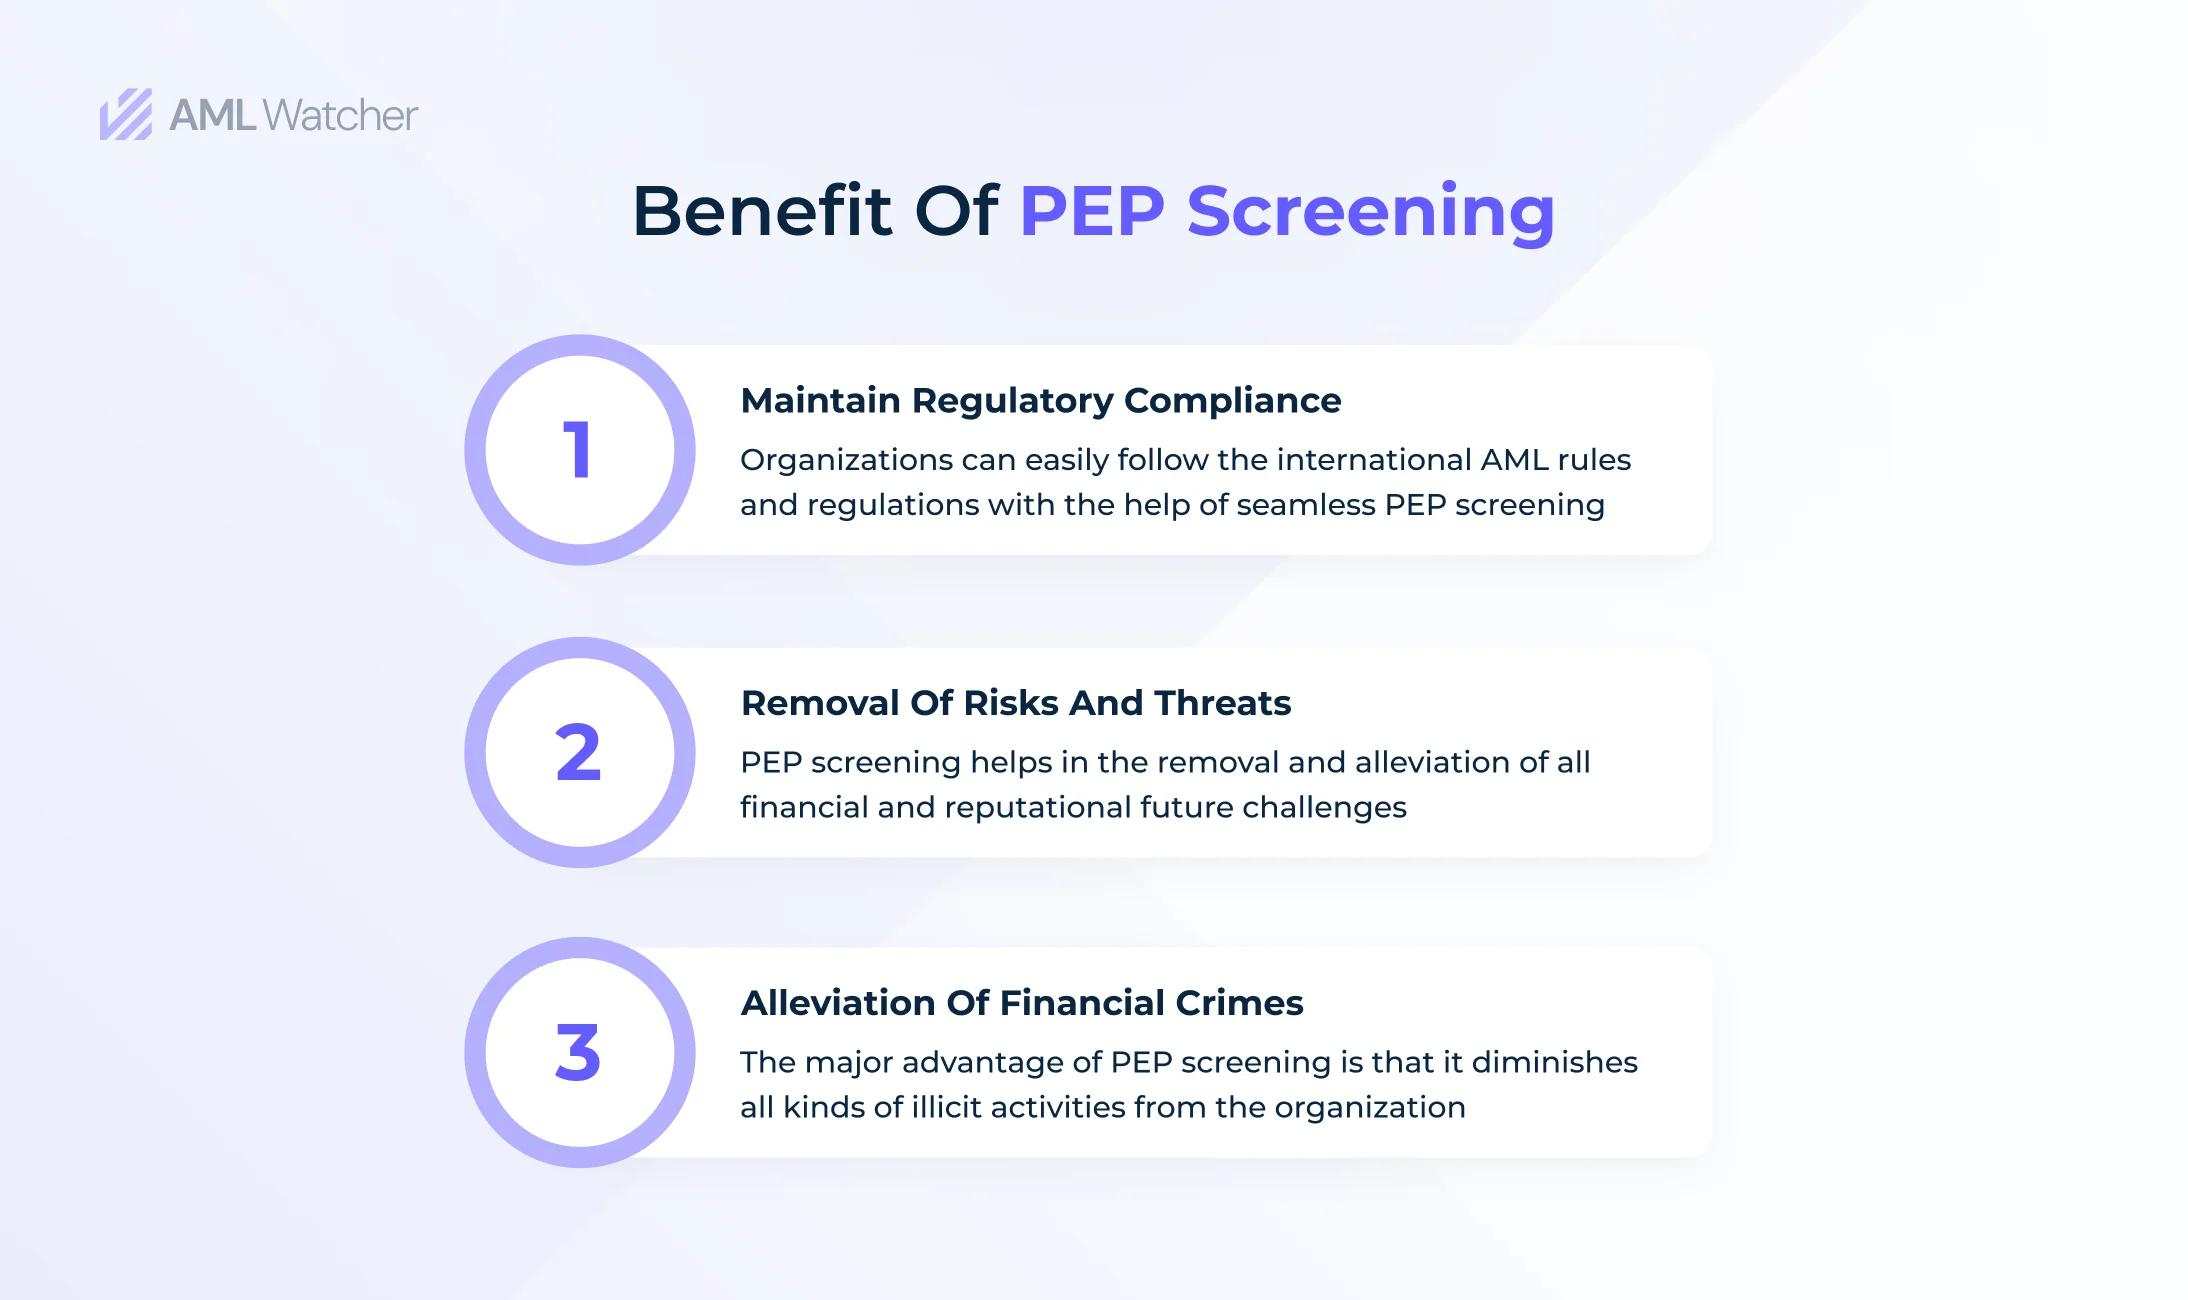 Organizations can enjoy a huge amount of perks with the help of PEP screening.